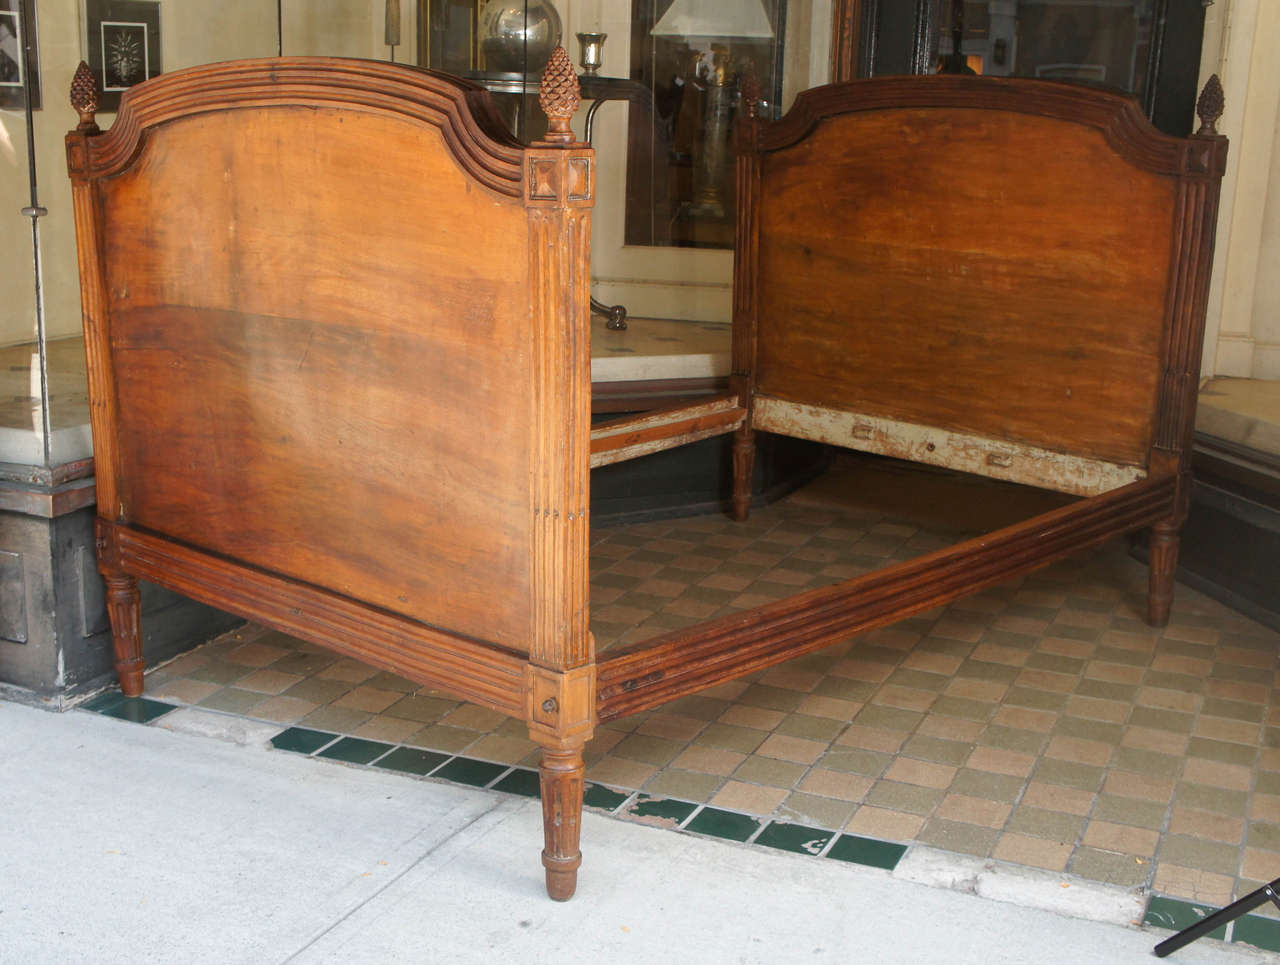 This fine bed made in circa 1780 in the Louis XVI style is constructed of walnut. The foot and headboard are carved with acorn finials centered on square carved panels connected with ogee carved sections. The entire bed is constructed with dowels